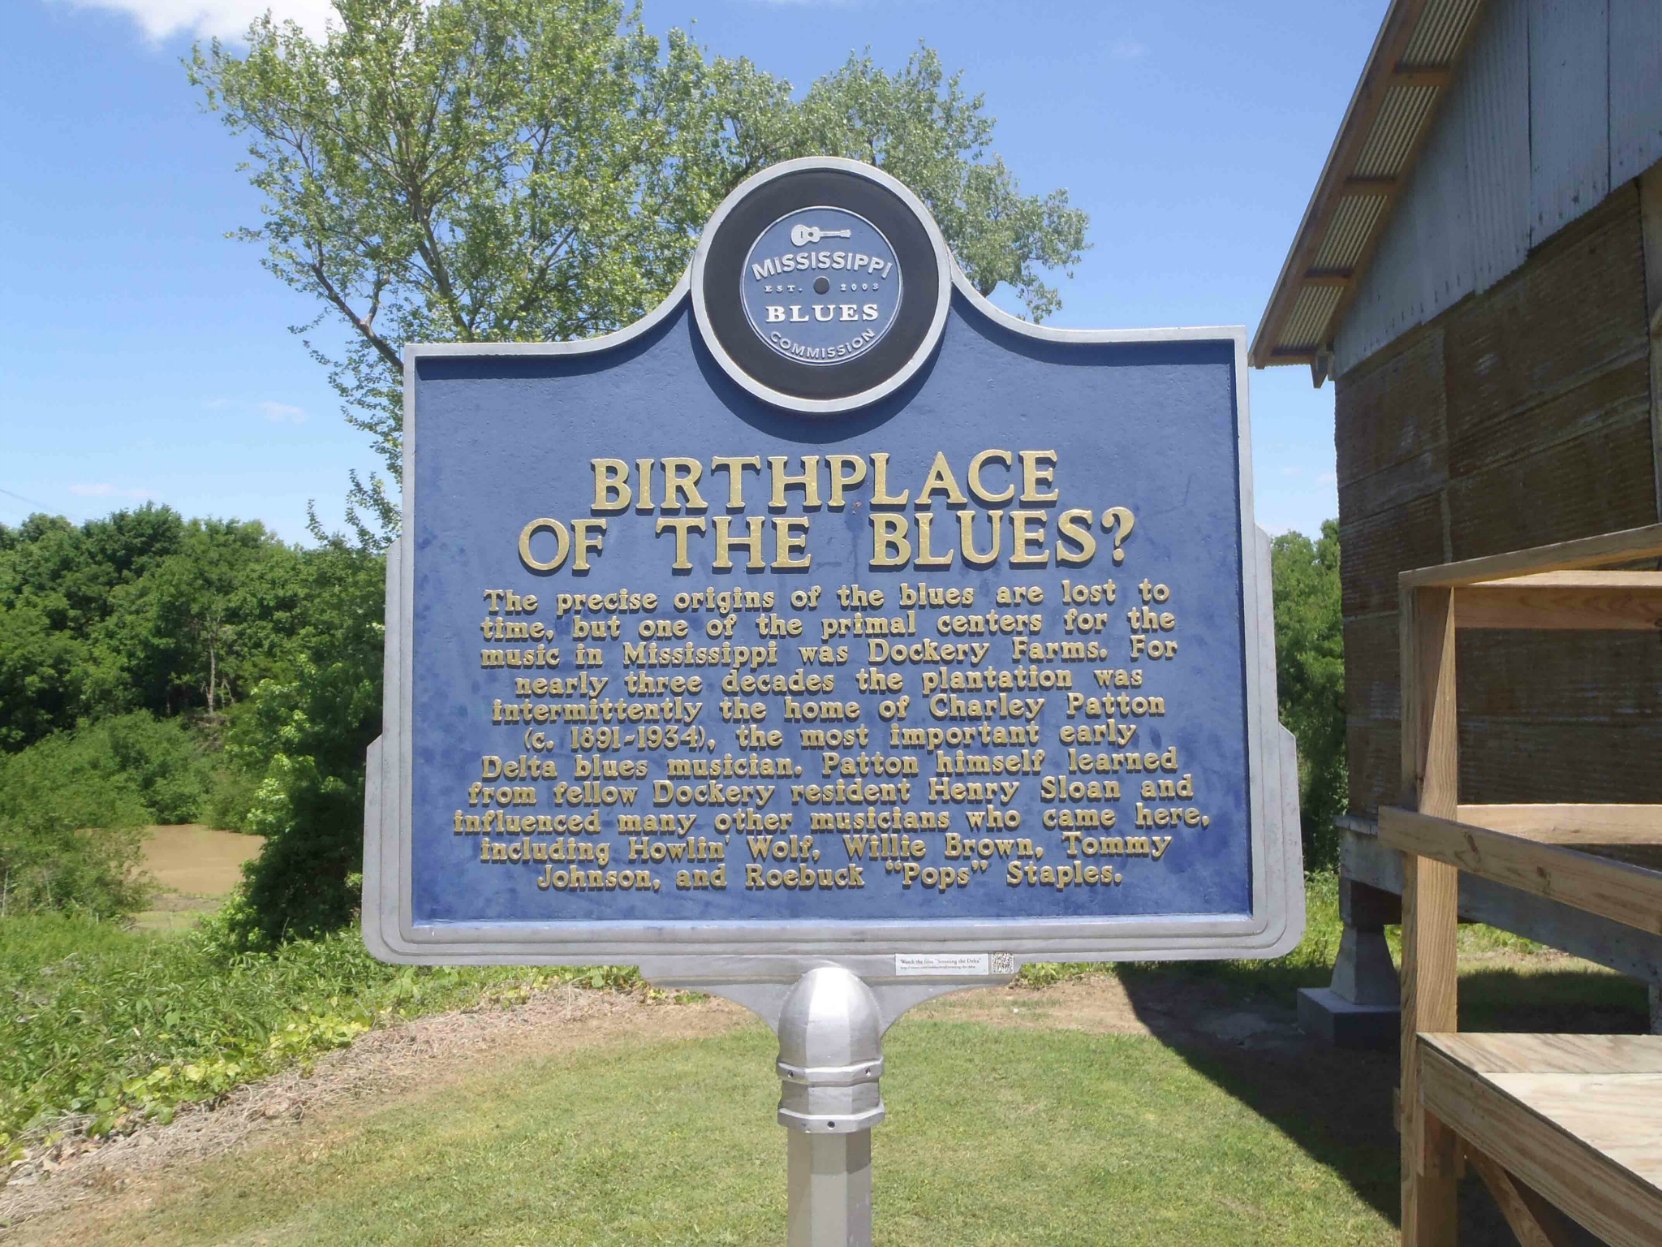 The Mississippi Blues Trail, Birthplace of the Blues? marker, Dockery Farms, Highway 8, Sunflower County, Mississippi